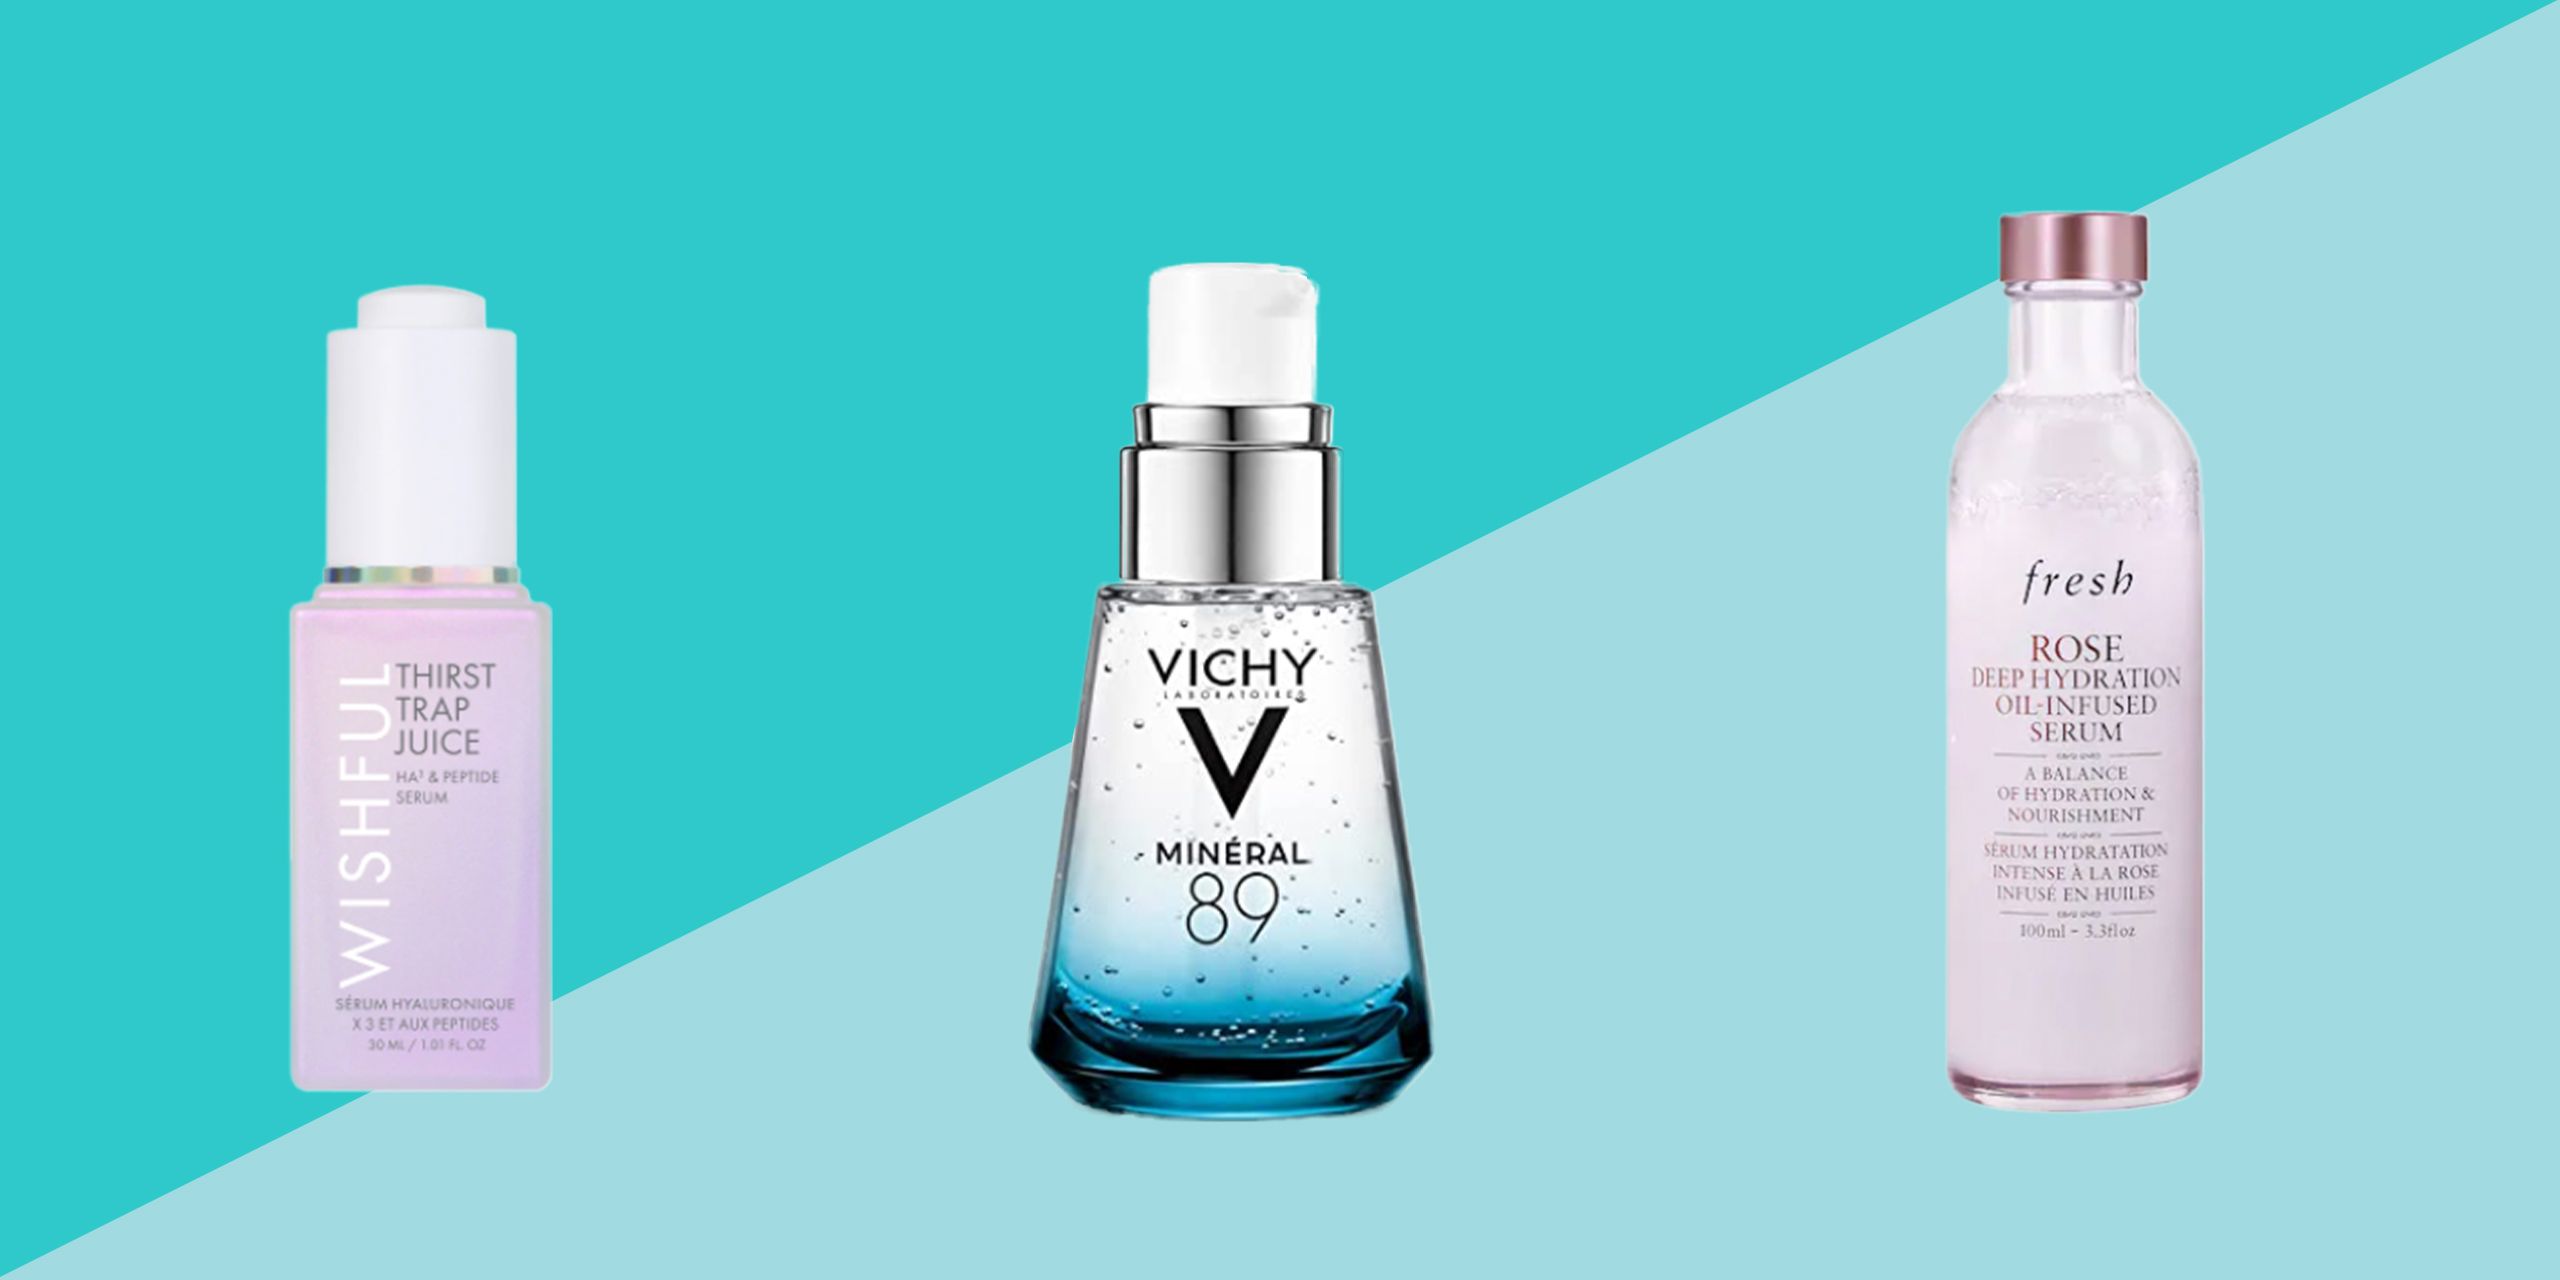 15 Best Hydrating Facial Serums, According to Dermatologists